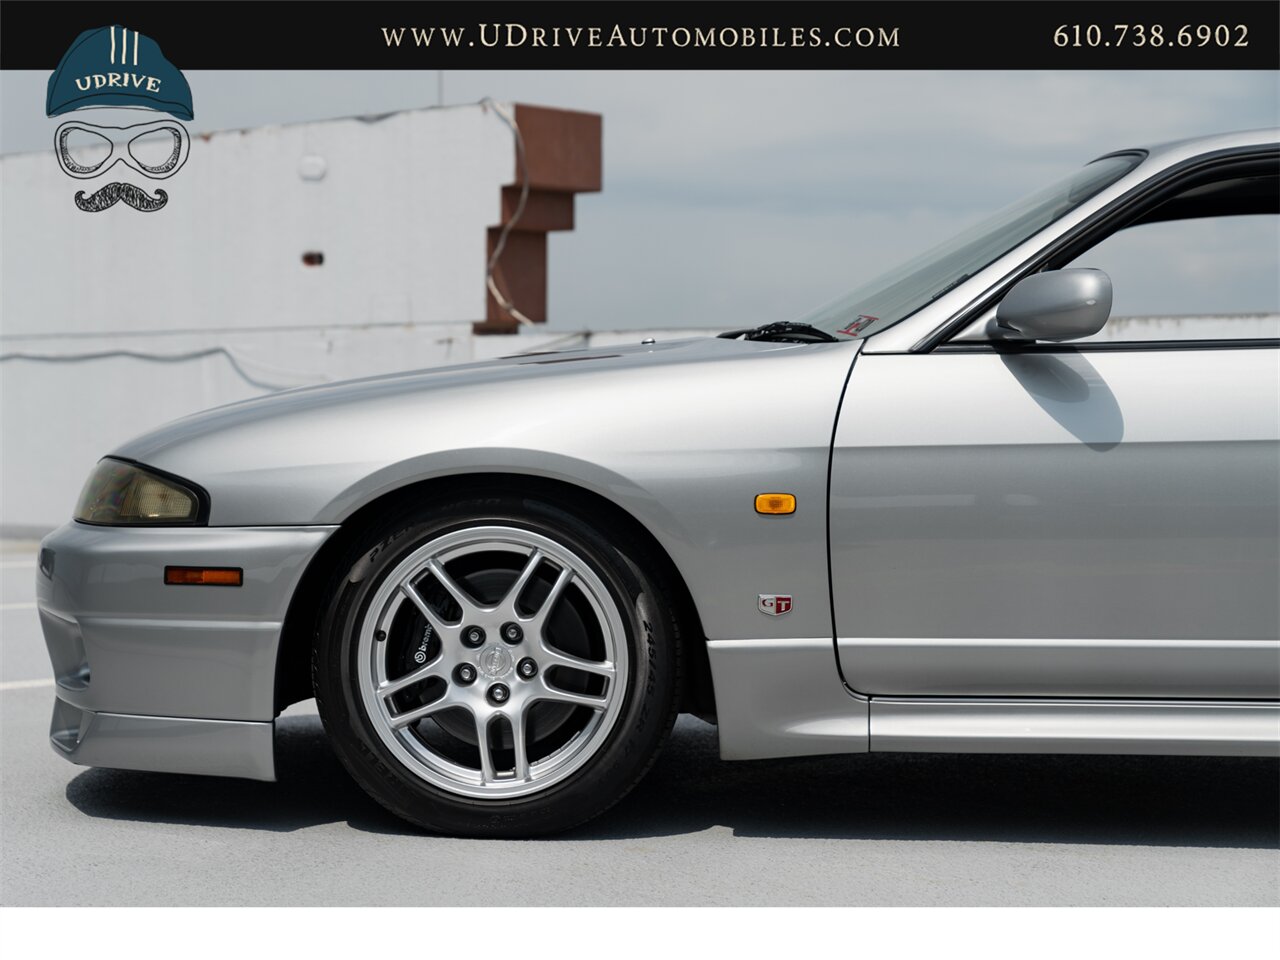 1997 Nissan Skyline GT-R R33 28k Miles Collector Grade  Motorex Legally Imported Titled Federalized Service History - Photo 10 - West Chester, PA 19382